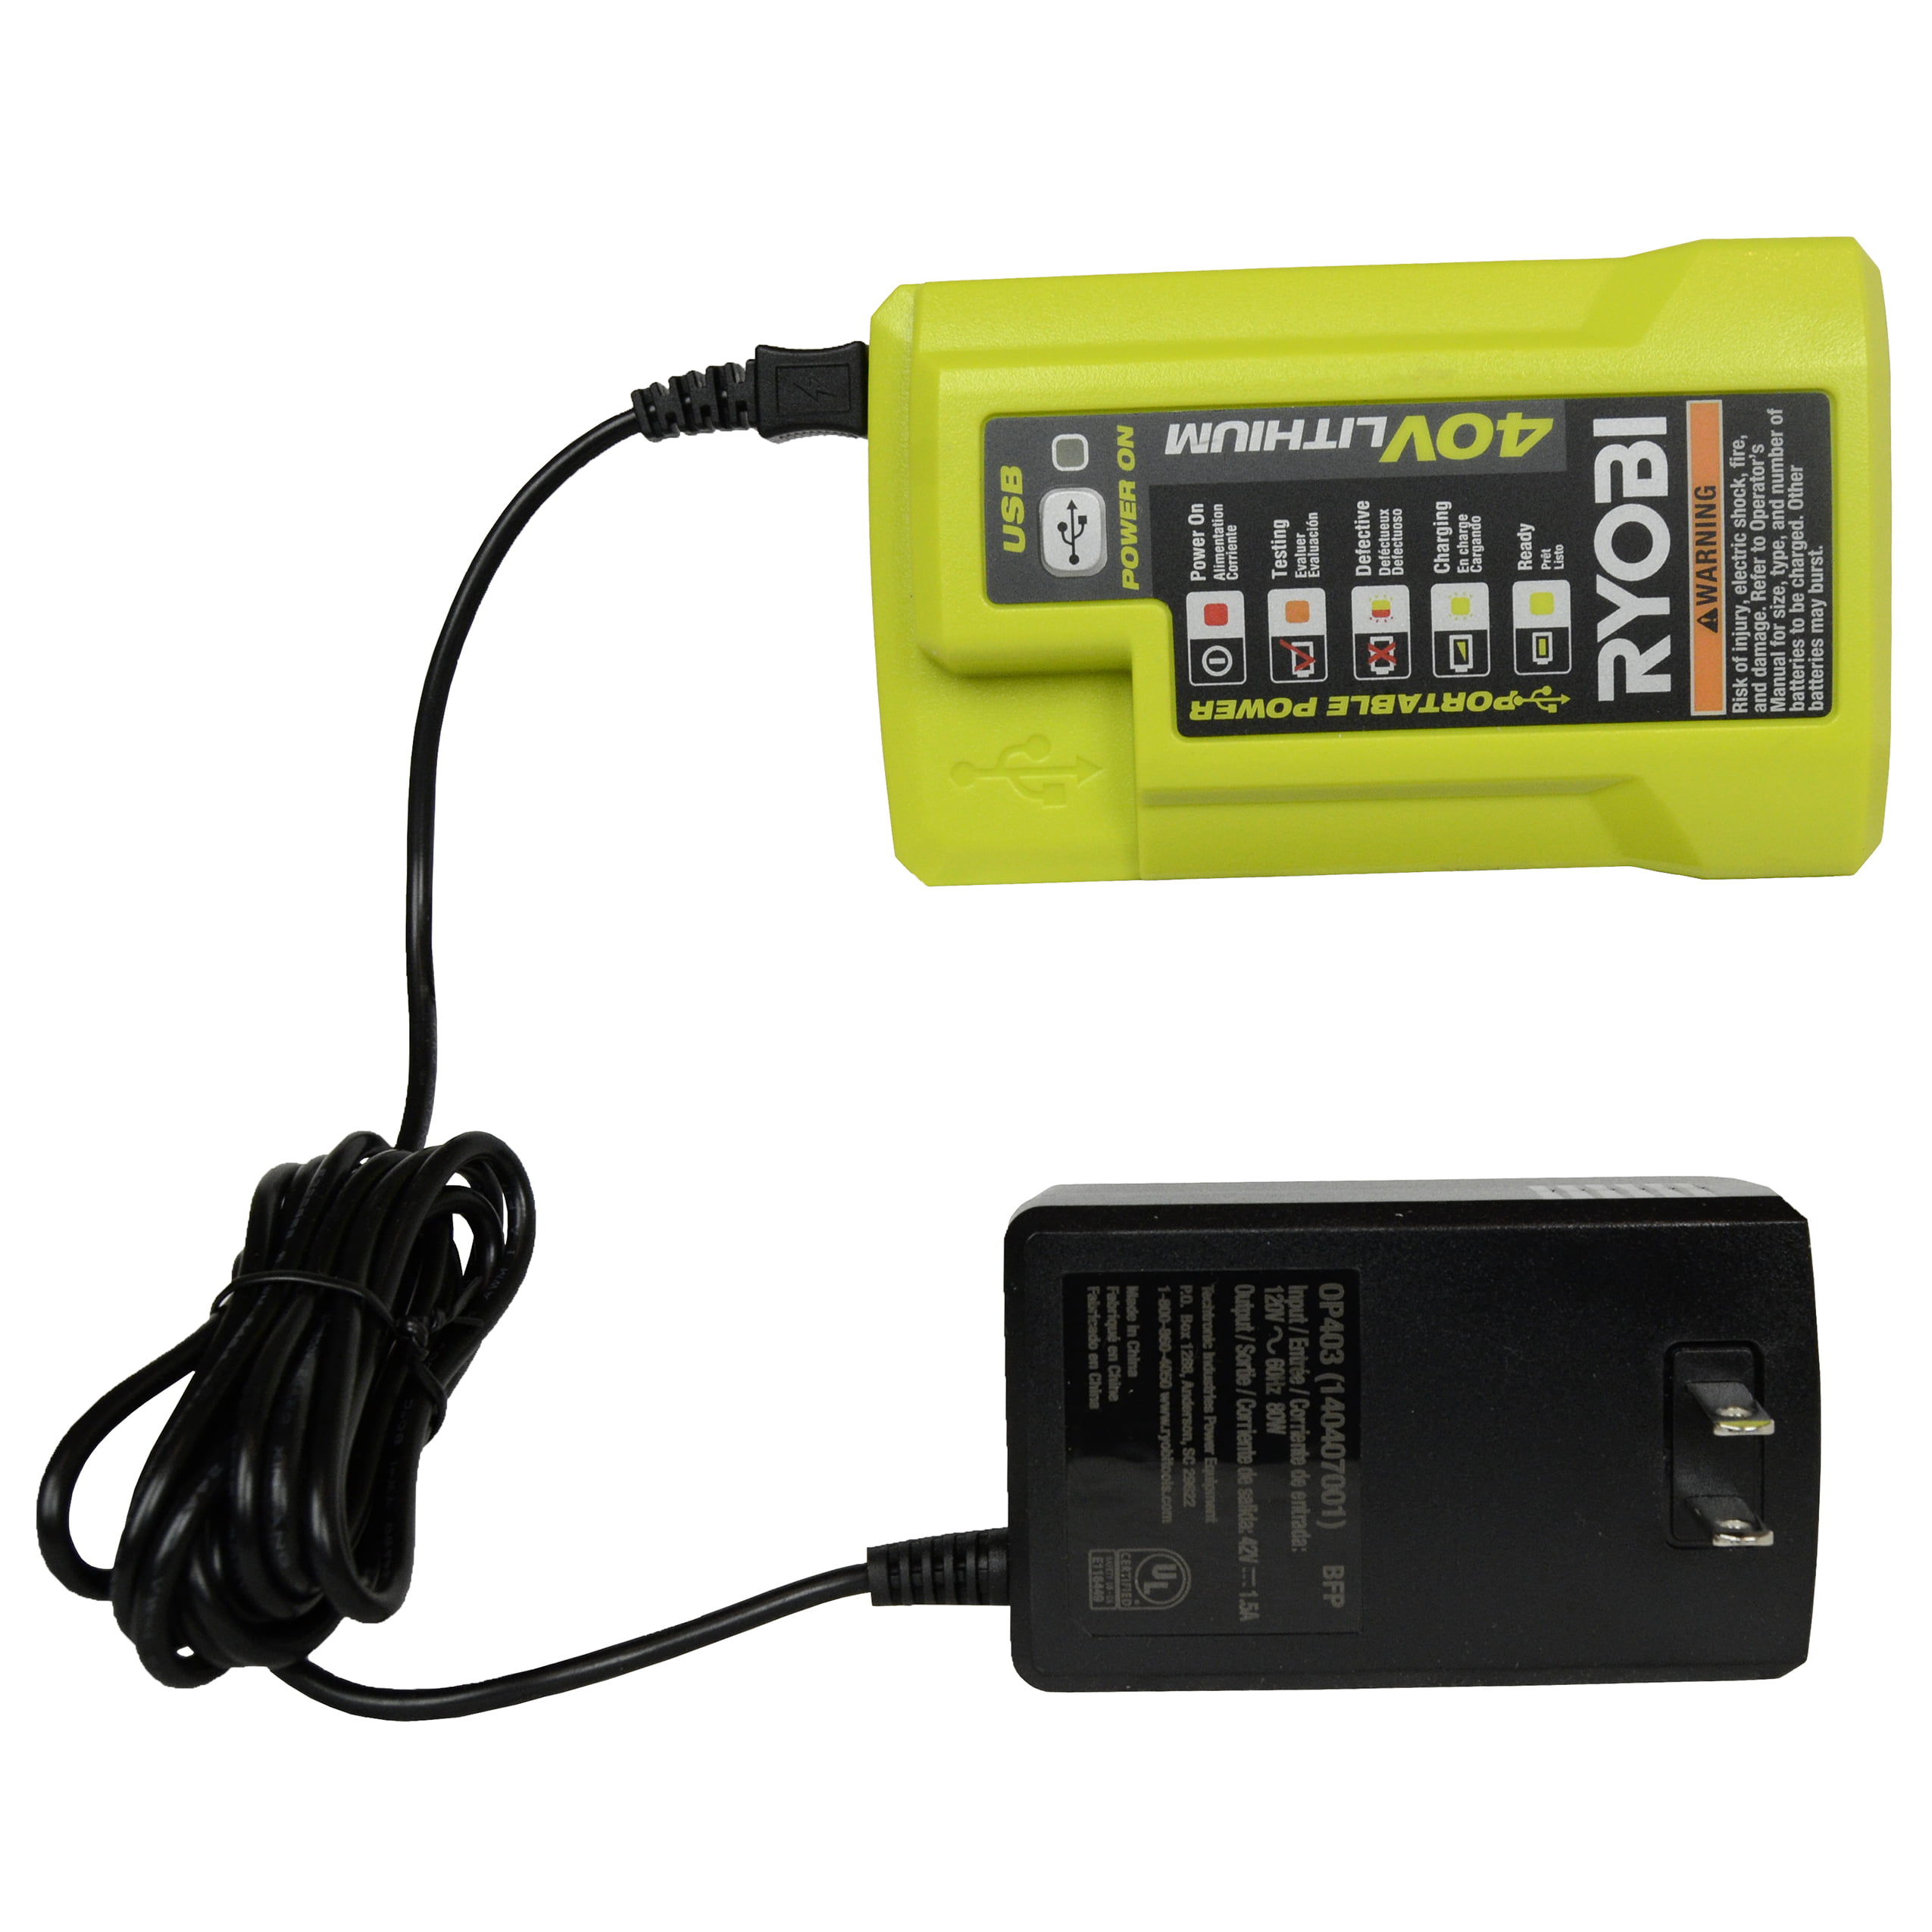 Ryobi Op403 40v Lithium Ion Rapid Battery Charger